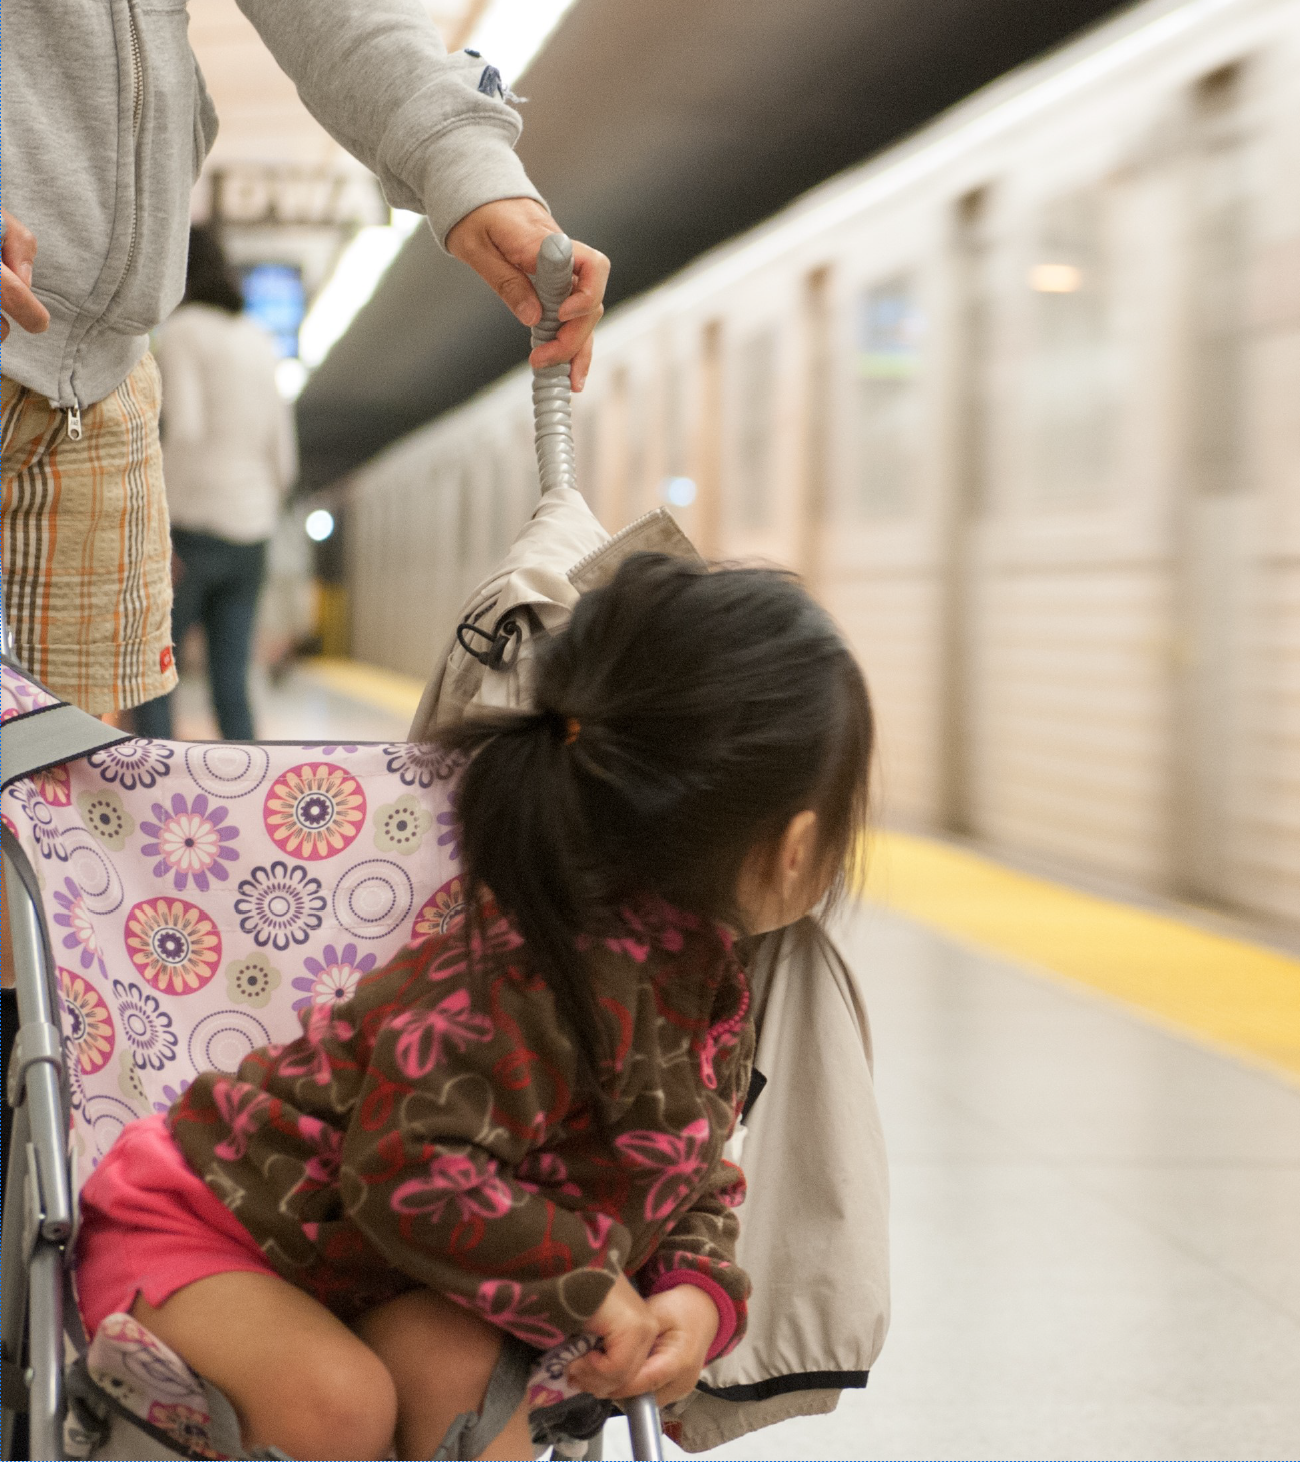 A young girl is pushed in a stroller on a subway platform while a train passes by.